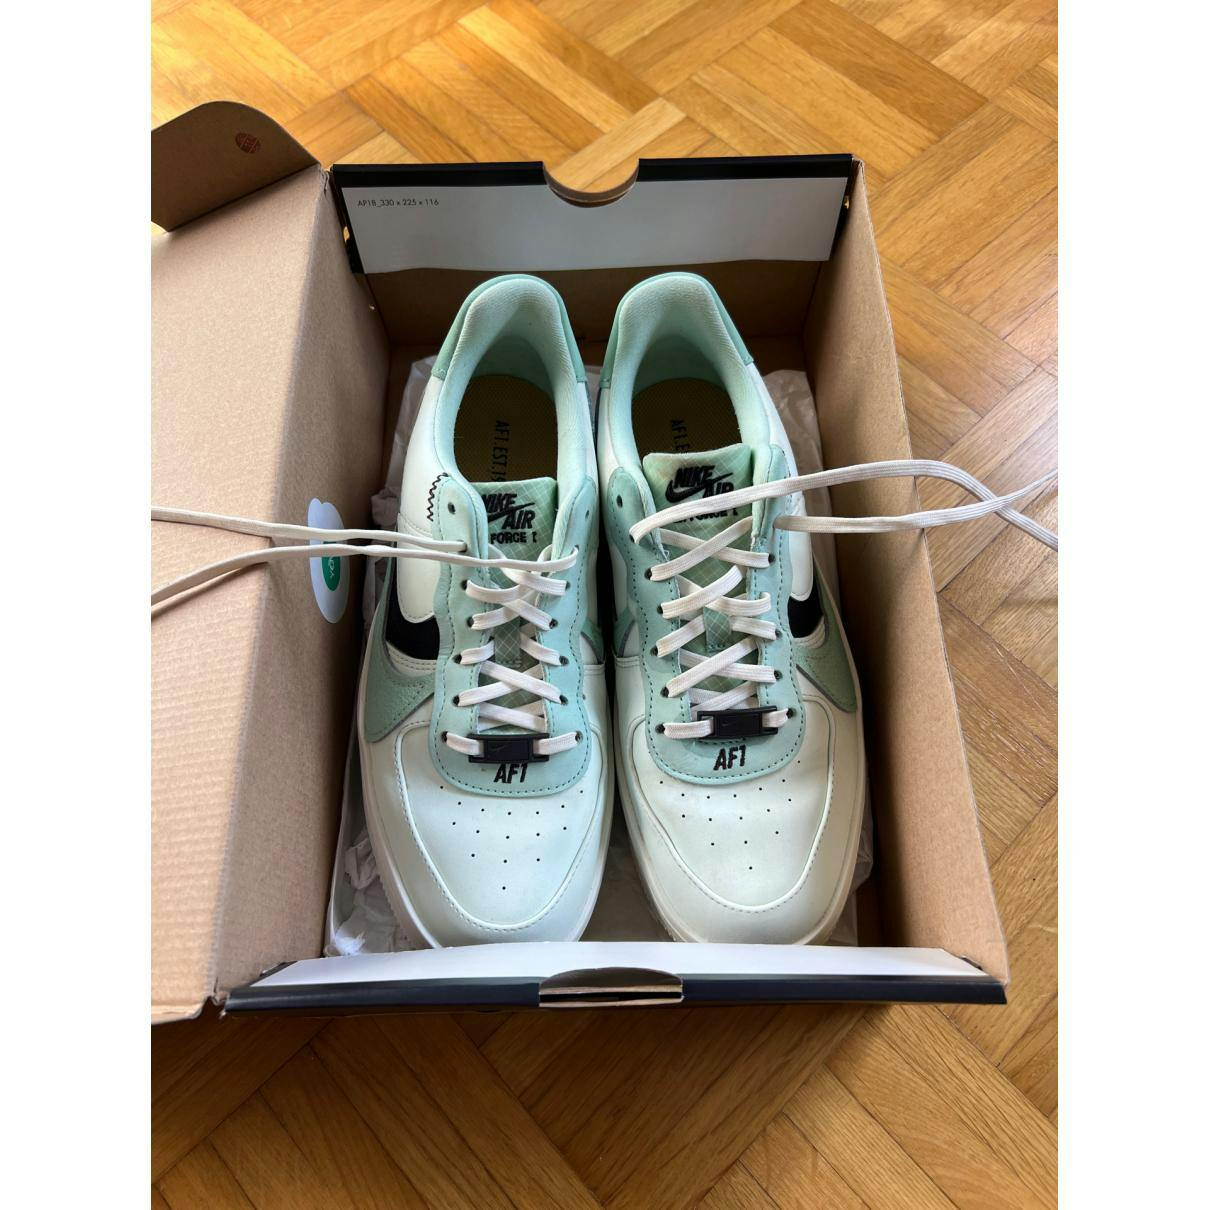 https://images.vestiairecollective.com/cdn-cgi/image/q=75,f=auto,/produit/green-leather-air-force-1-nike-trainers-34609810-4_3.jpg?secret=VC-e9eee96a-a819-4431-ad12-d066be2626ef